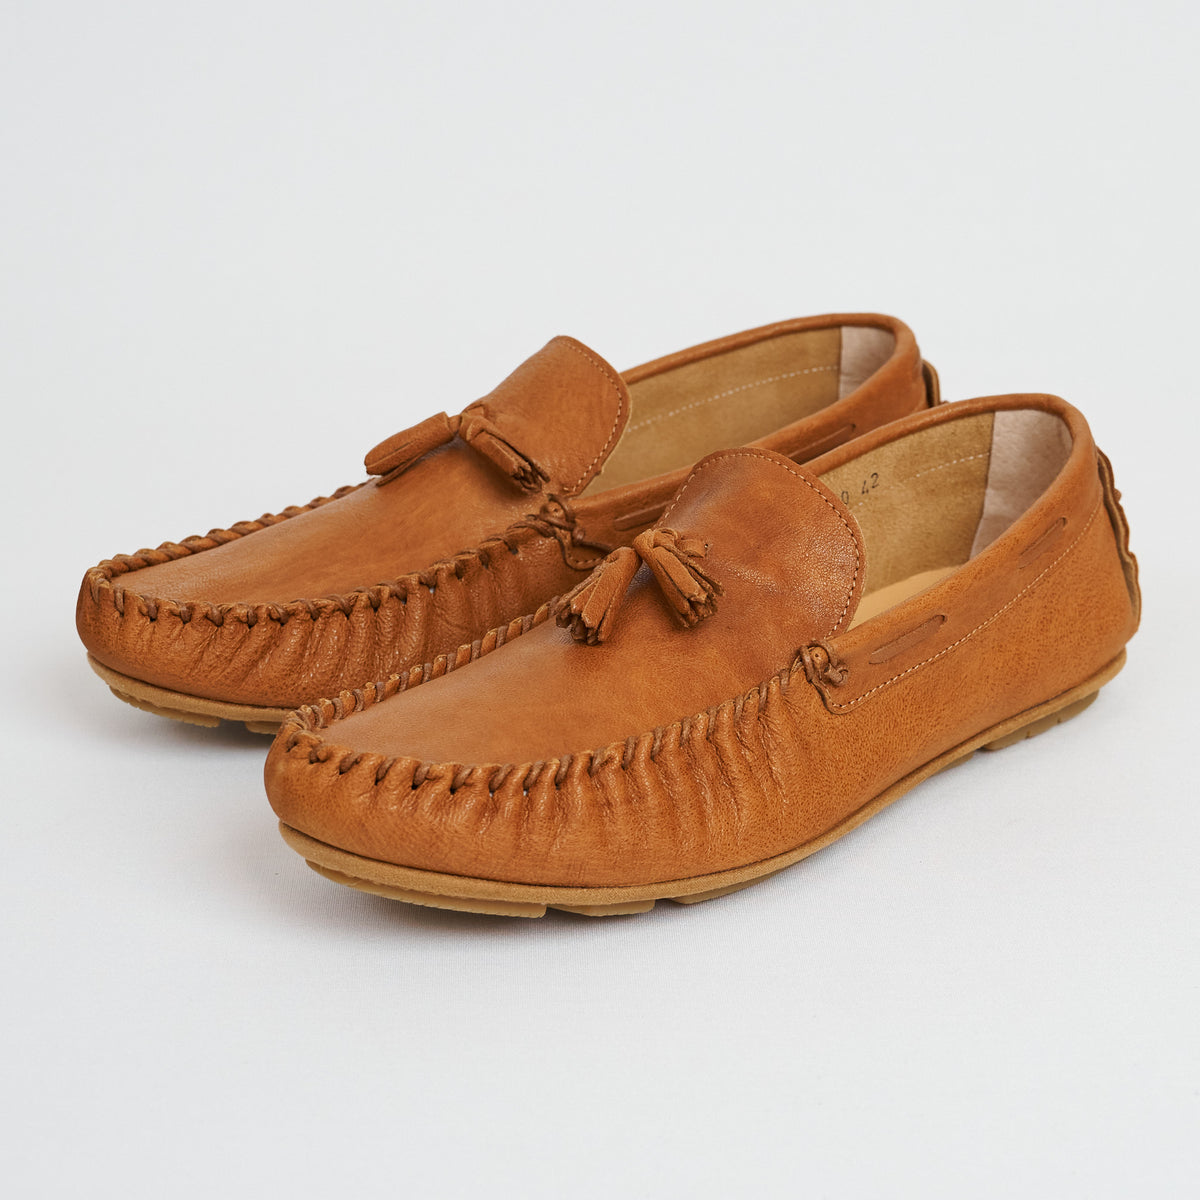 DeeCee style Hand Made Moccassin